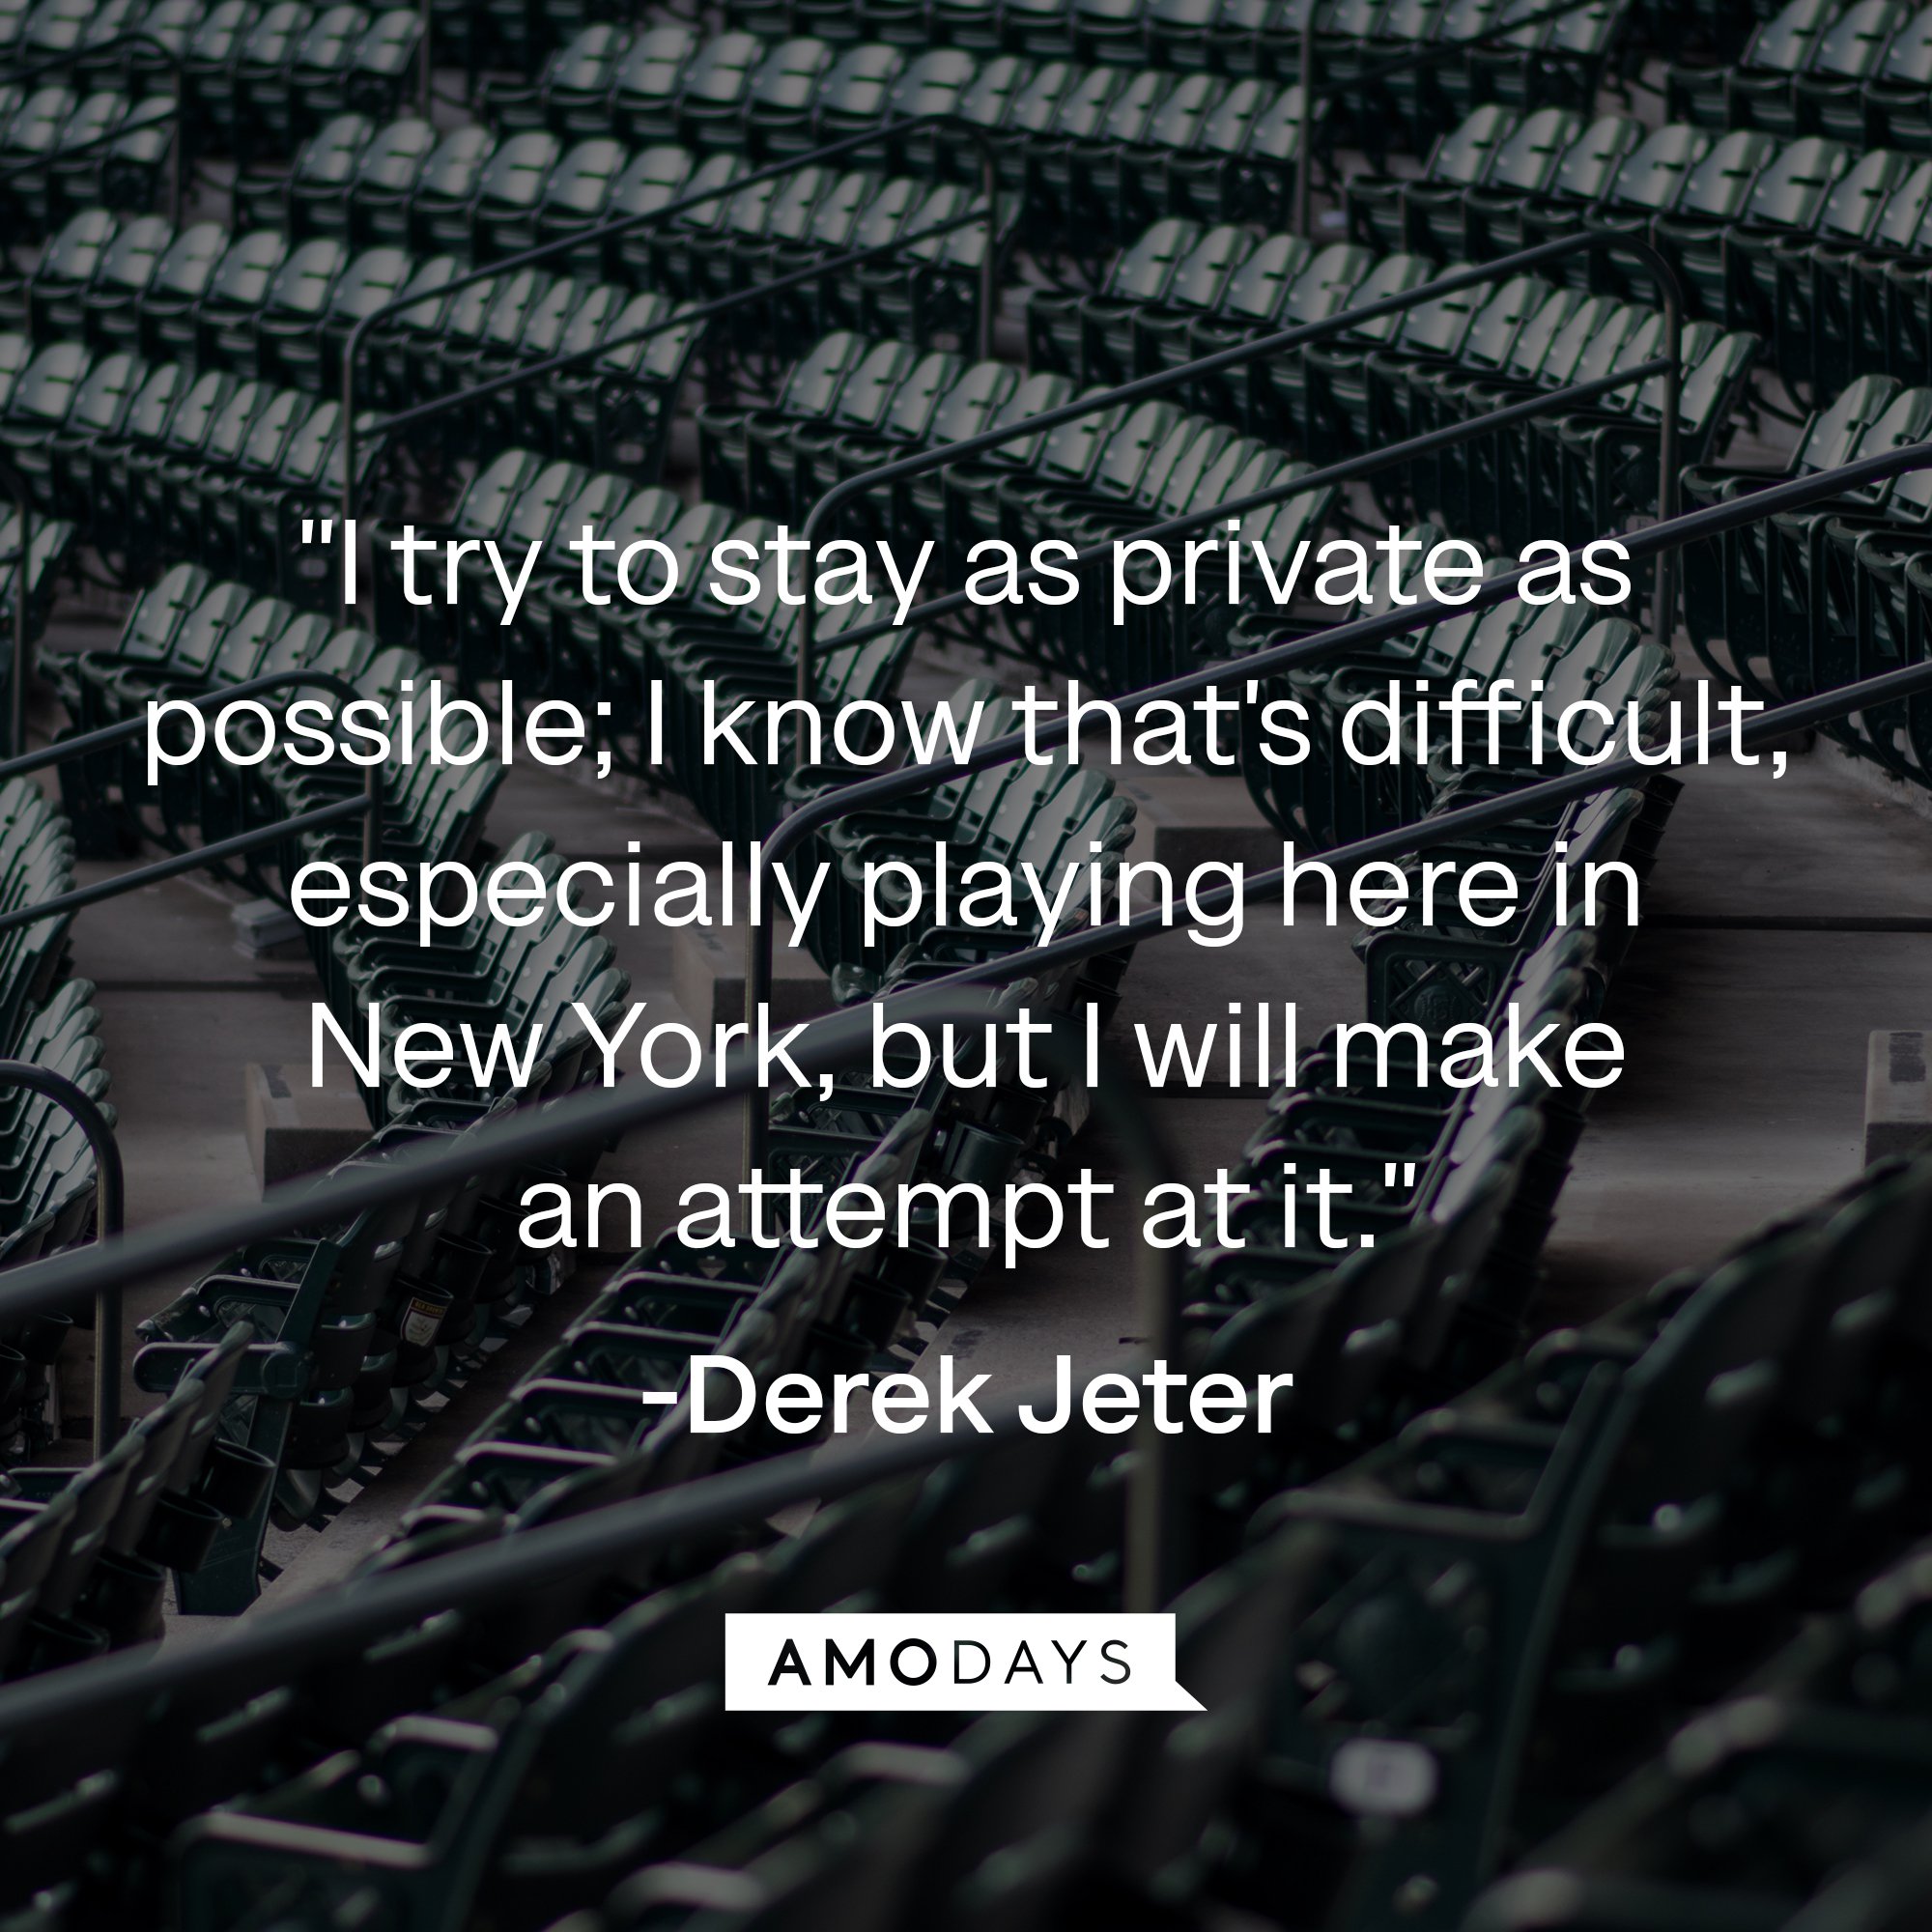 Derek Jeter's quote: "I try to stay as private as possible; I know that's difficult, especially playing here in New York, but I will make an attempt at it." | Image: AmoDays